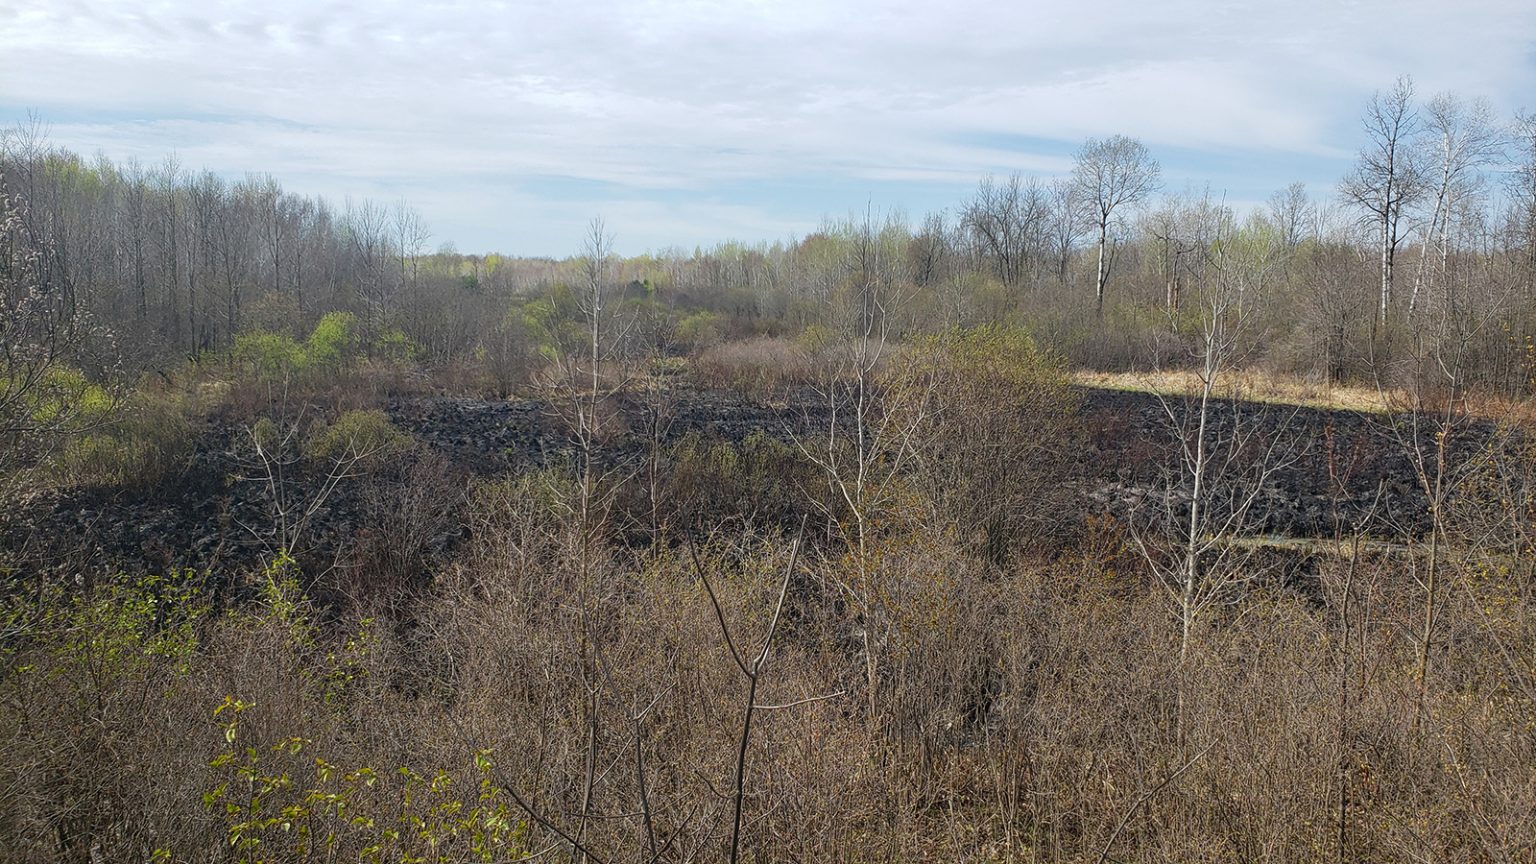 Scorched vegetation from a prescribed burn surrounded by unburned areas